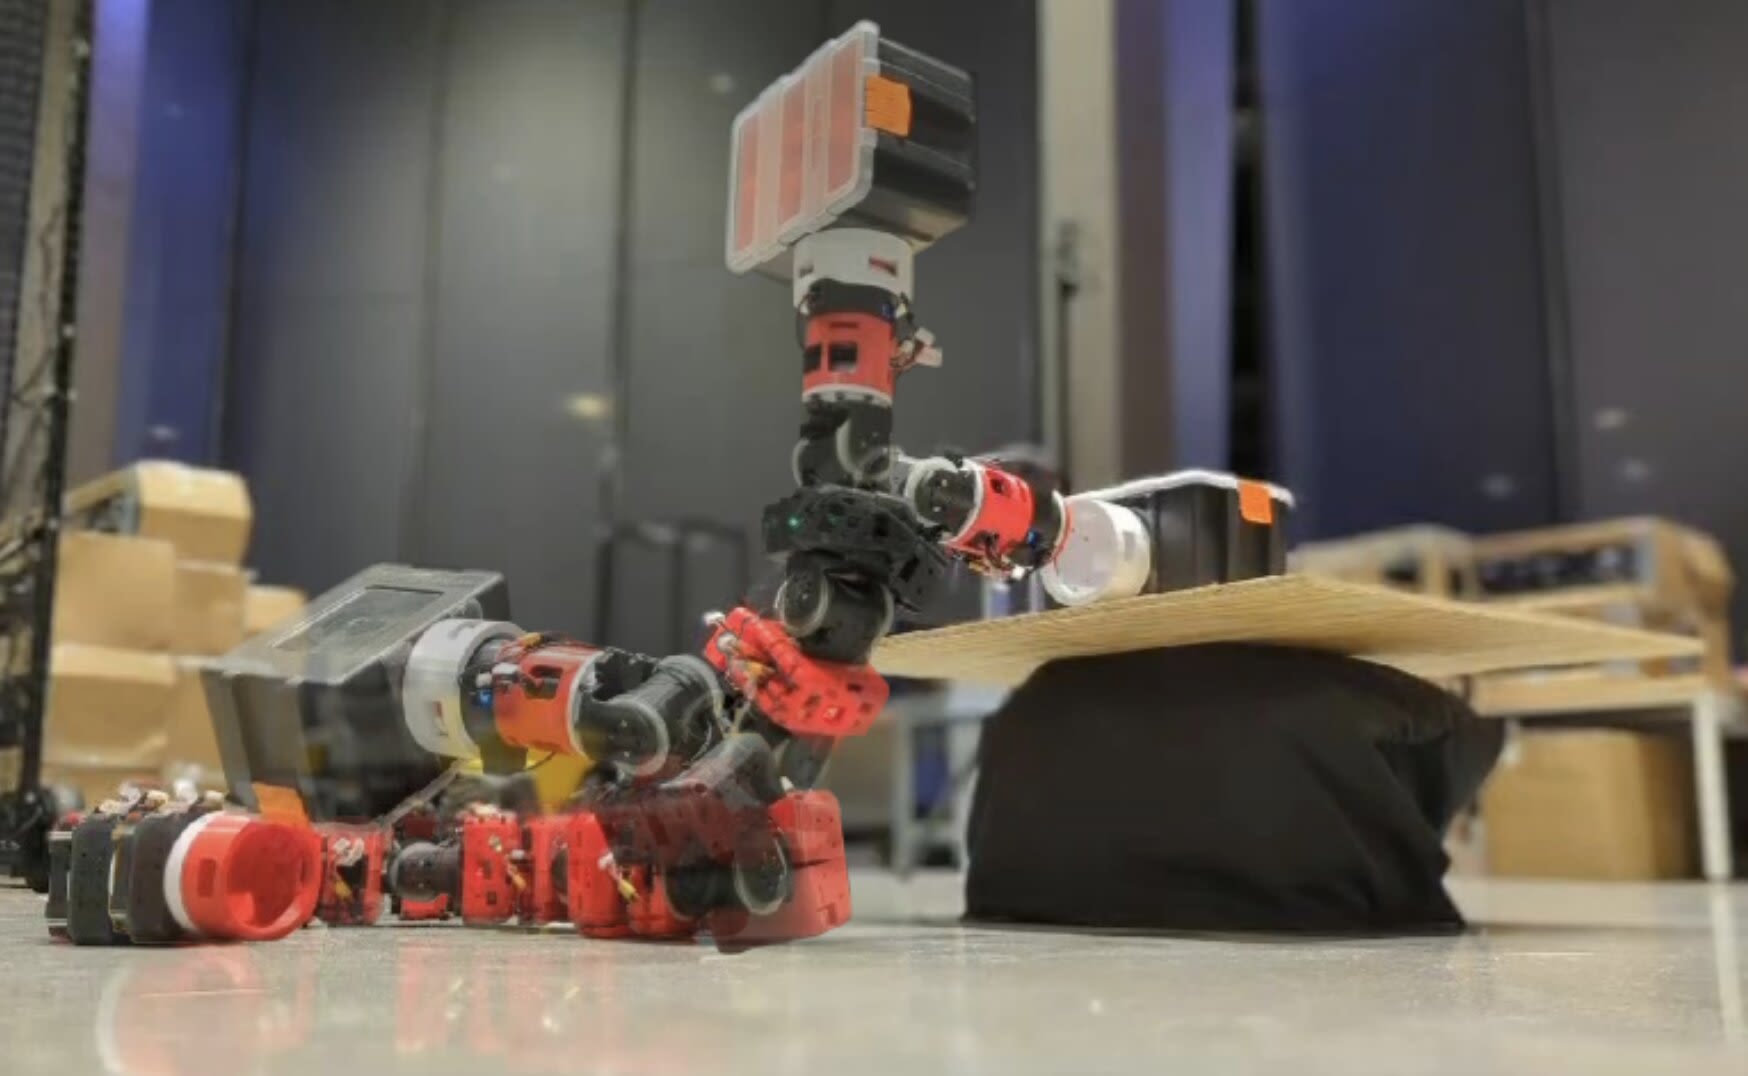 An approach to enable both locomotion and manipulation in a snake-inspired robot